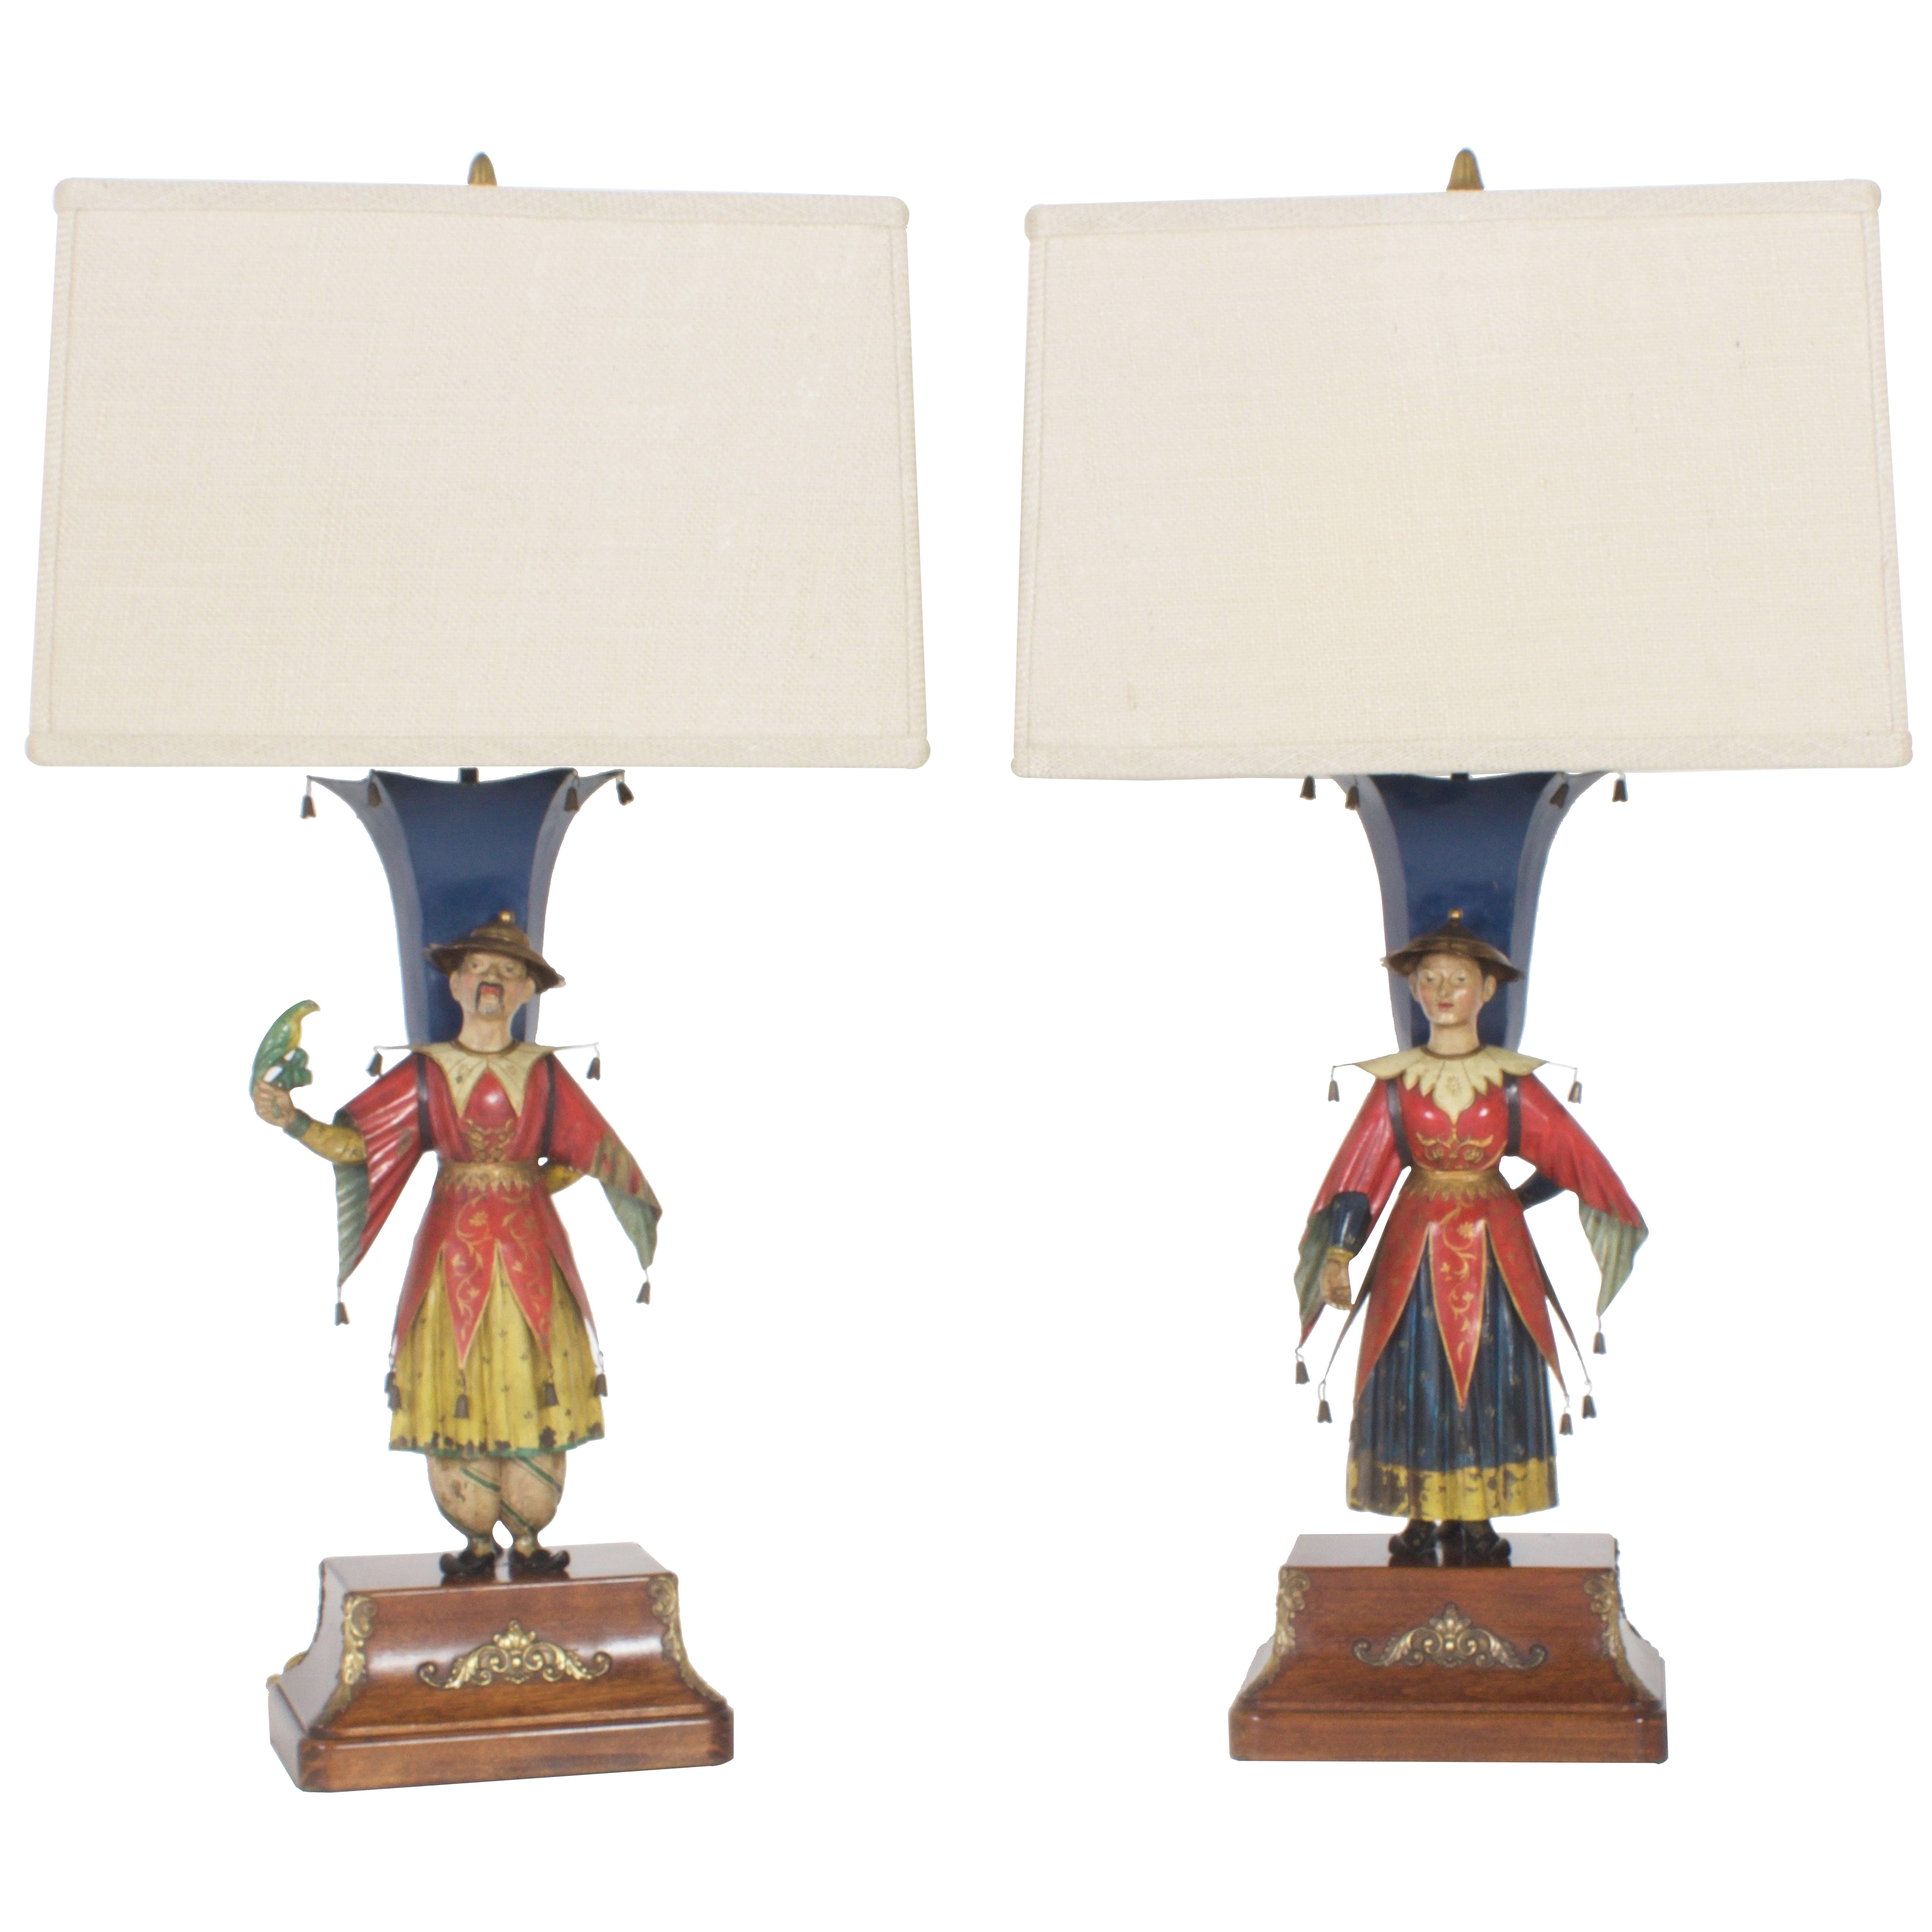 Pair of Tole Chinoiserie Figural Table Lamps, Exceptional